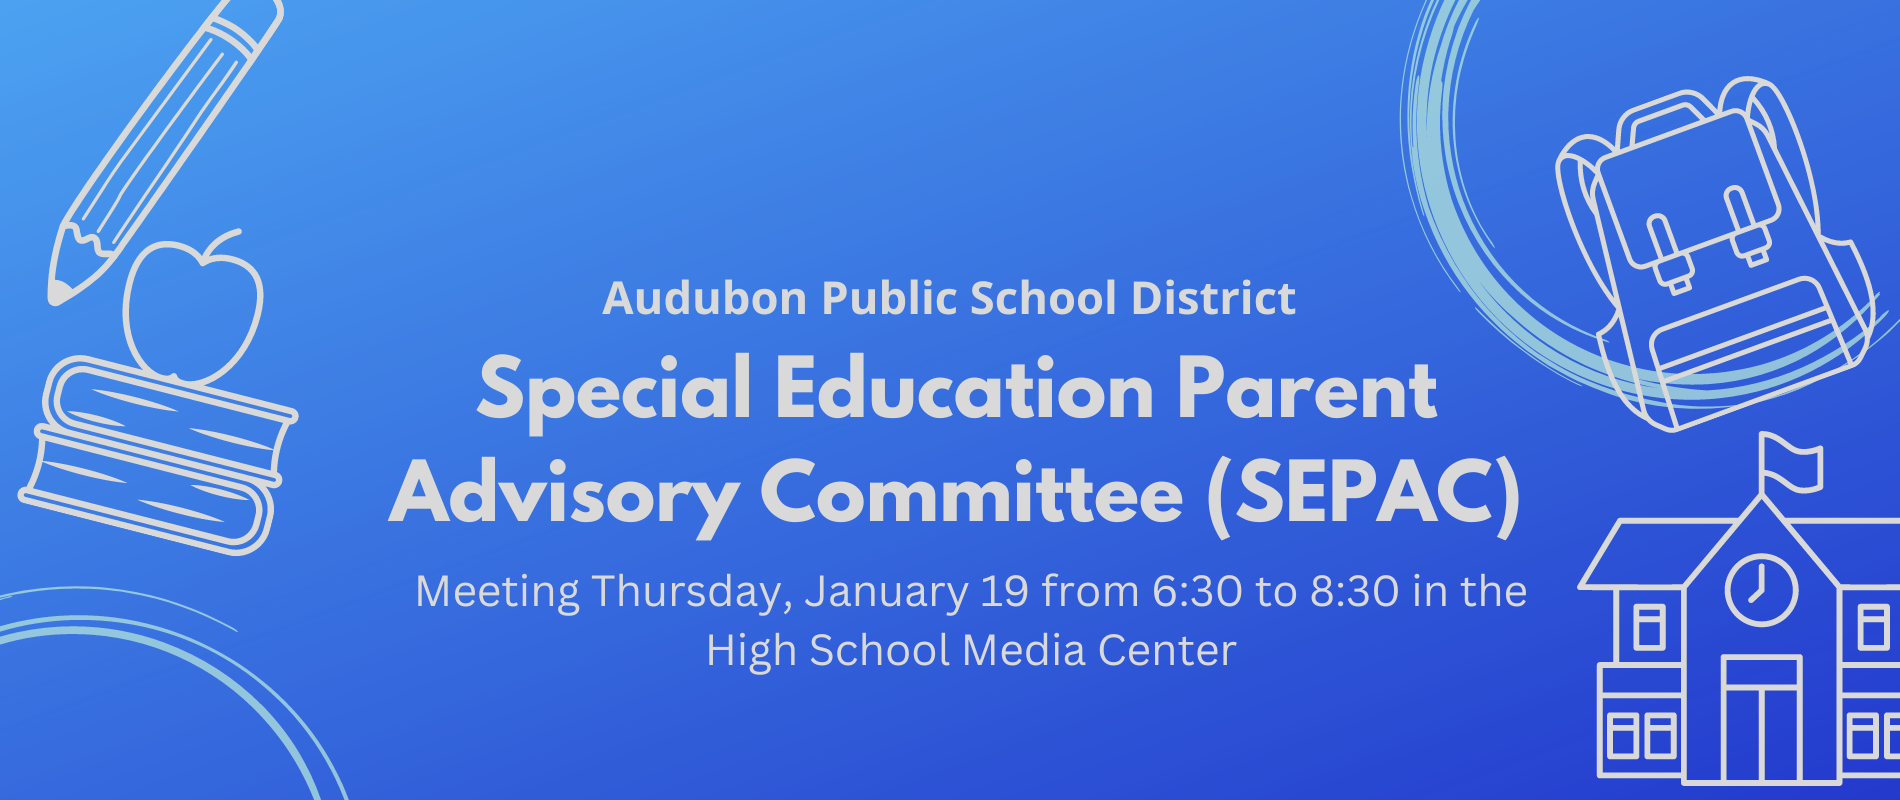 Special Education Parent Advisory Committee (SEPAC) Thursday, January 19 from 6:30 to 8:30 in the High School Media Center